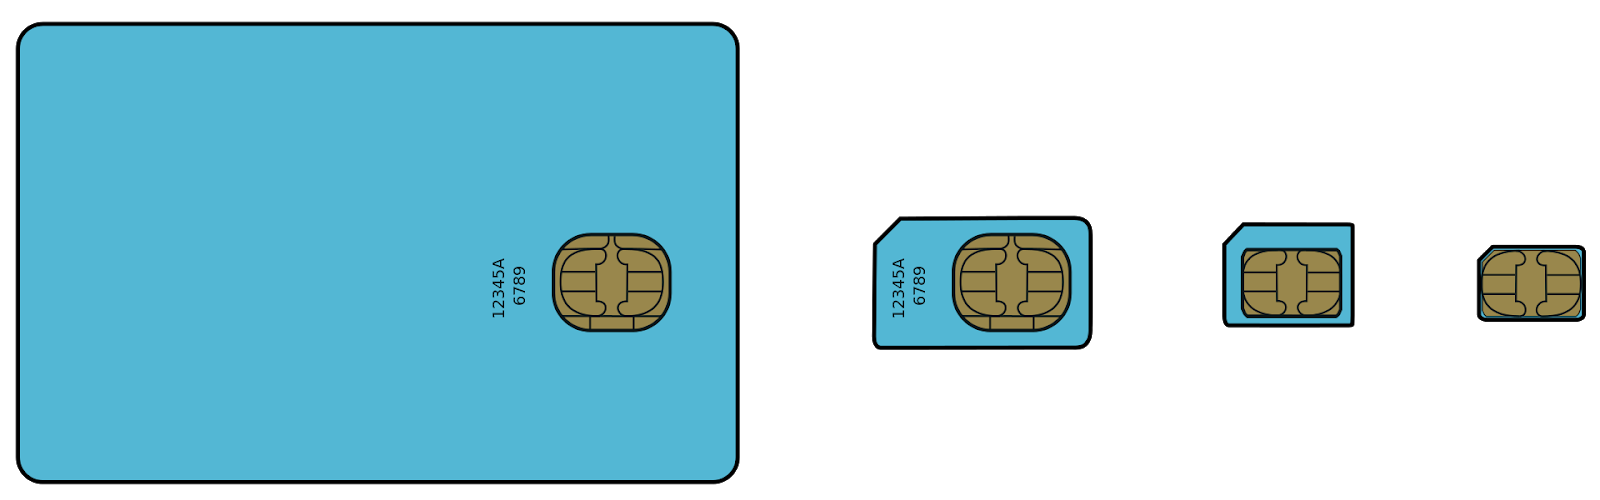 Reducing size of the physical sim card